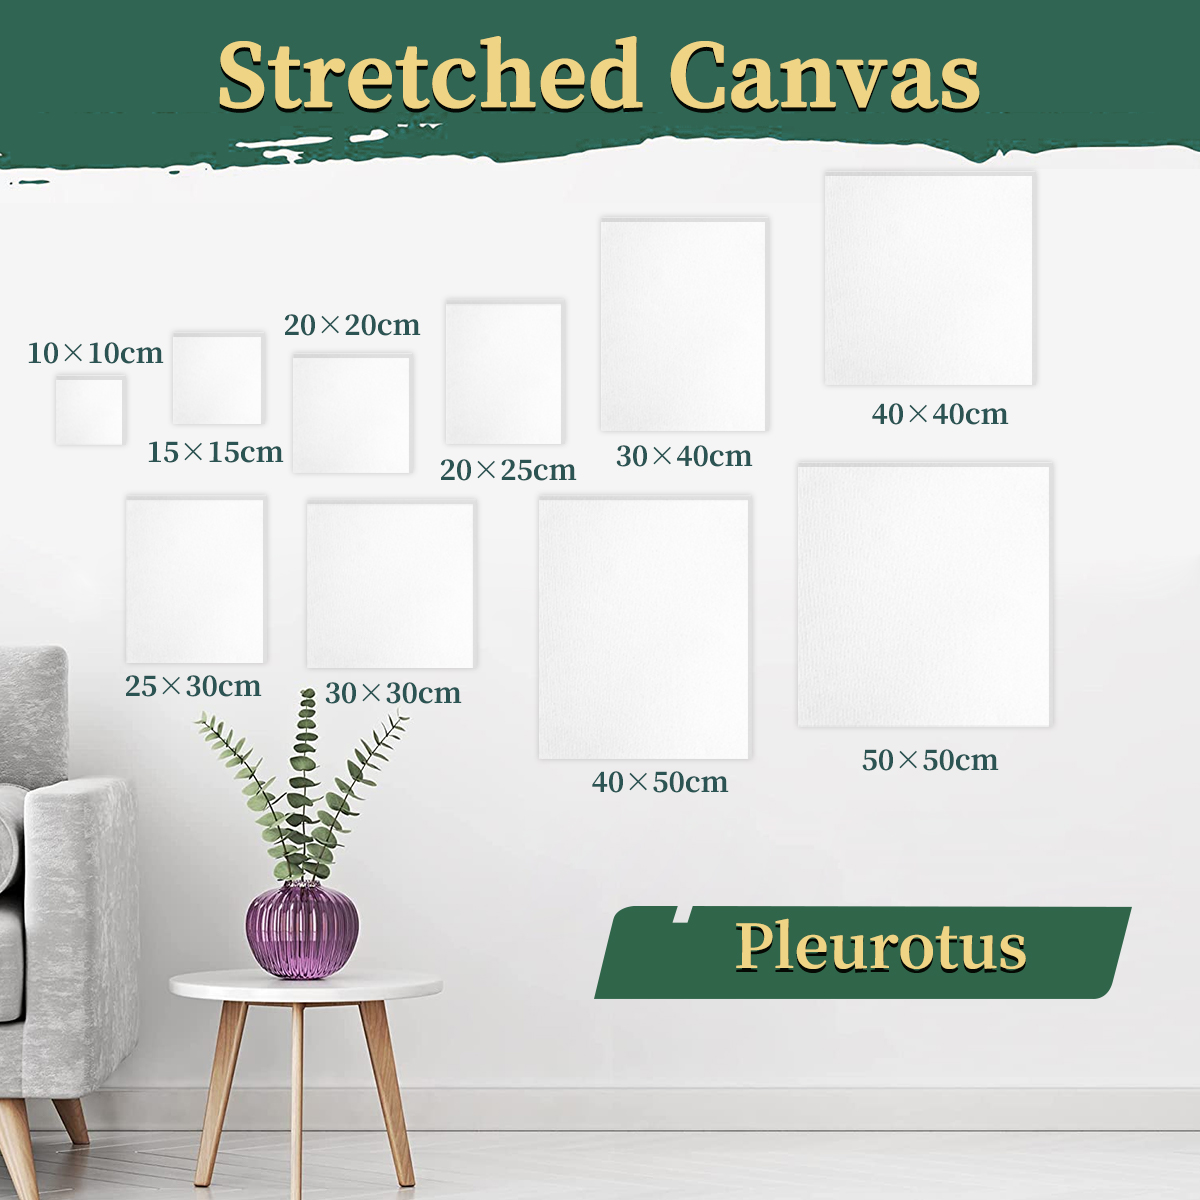 Artist Canvas Board for Painting, 100% Cotton Canvas Panels Painting Plain  with Wooden Frame, Blank Flat Canvas Art Panels Canvases for Oil & Acrylic  Painting (Multiple sizes)